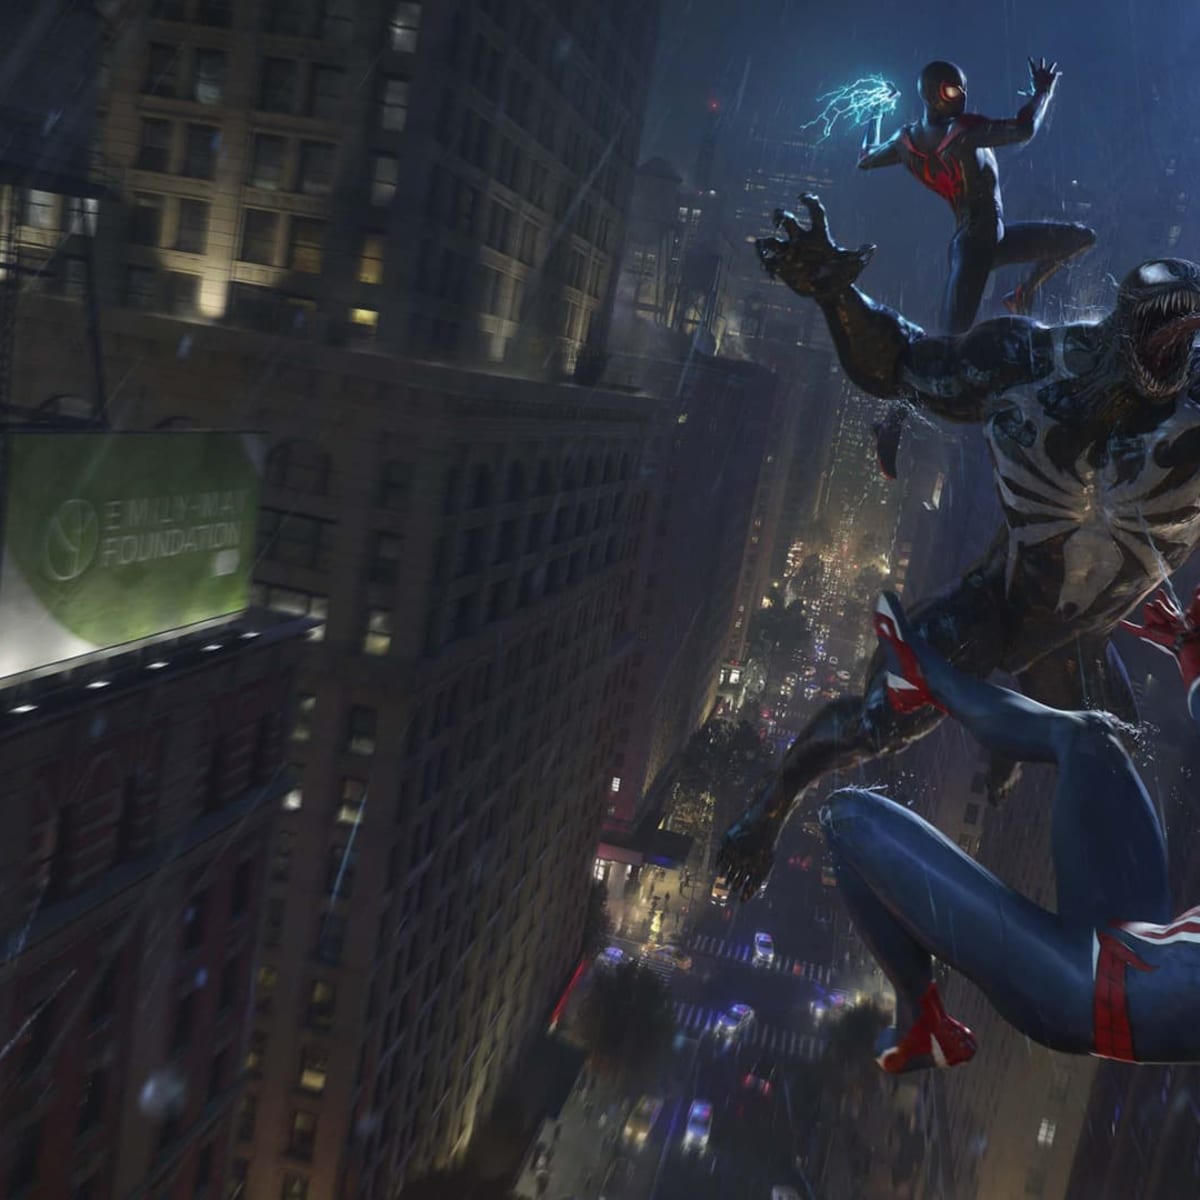 How Marvel's Spider-Man 2 Reviews Compare to the Last Two Games